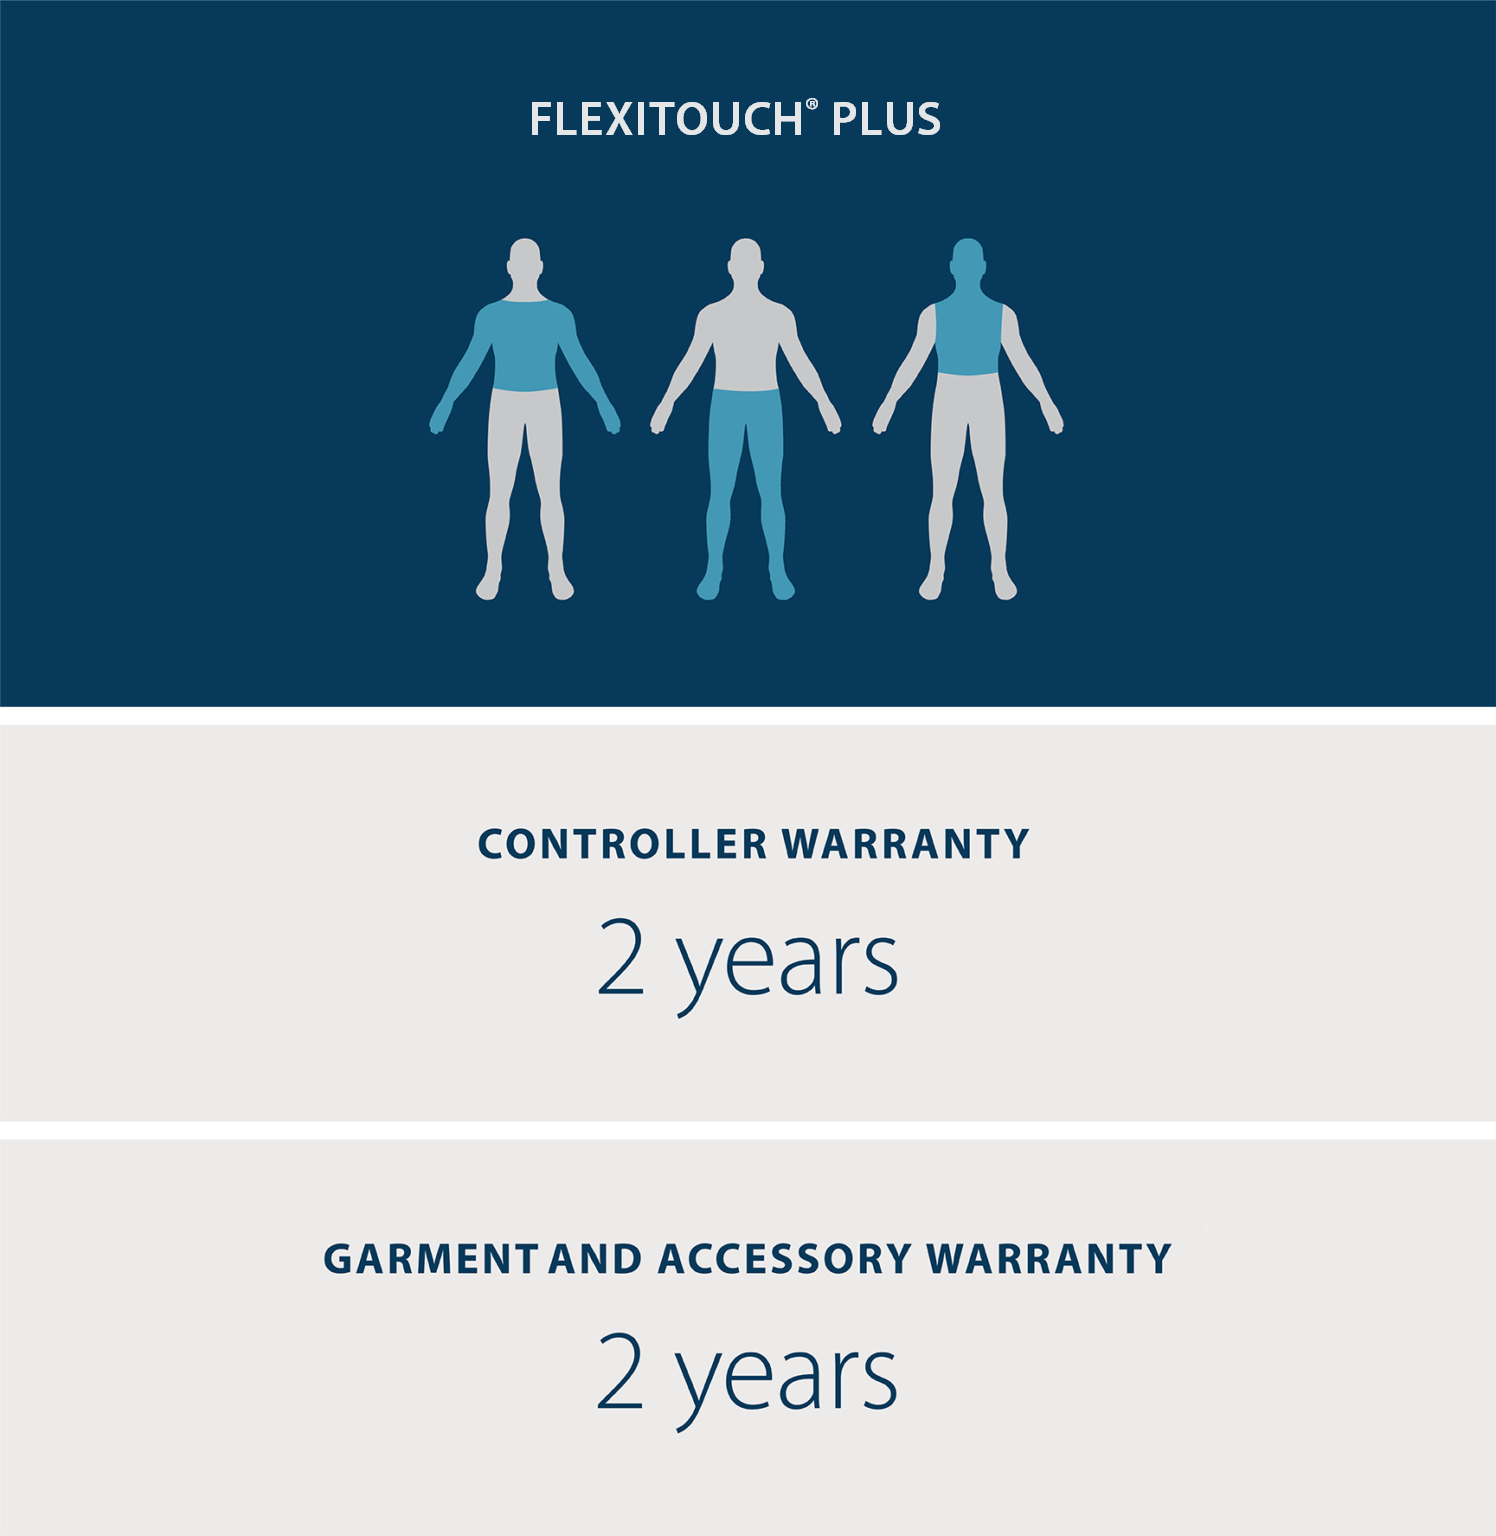 flexitouch plus warranty guide controller warranty is two years. garment and accessory warranty is two years.